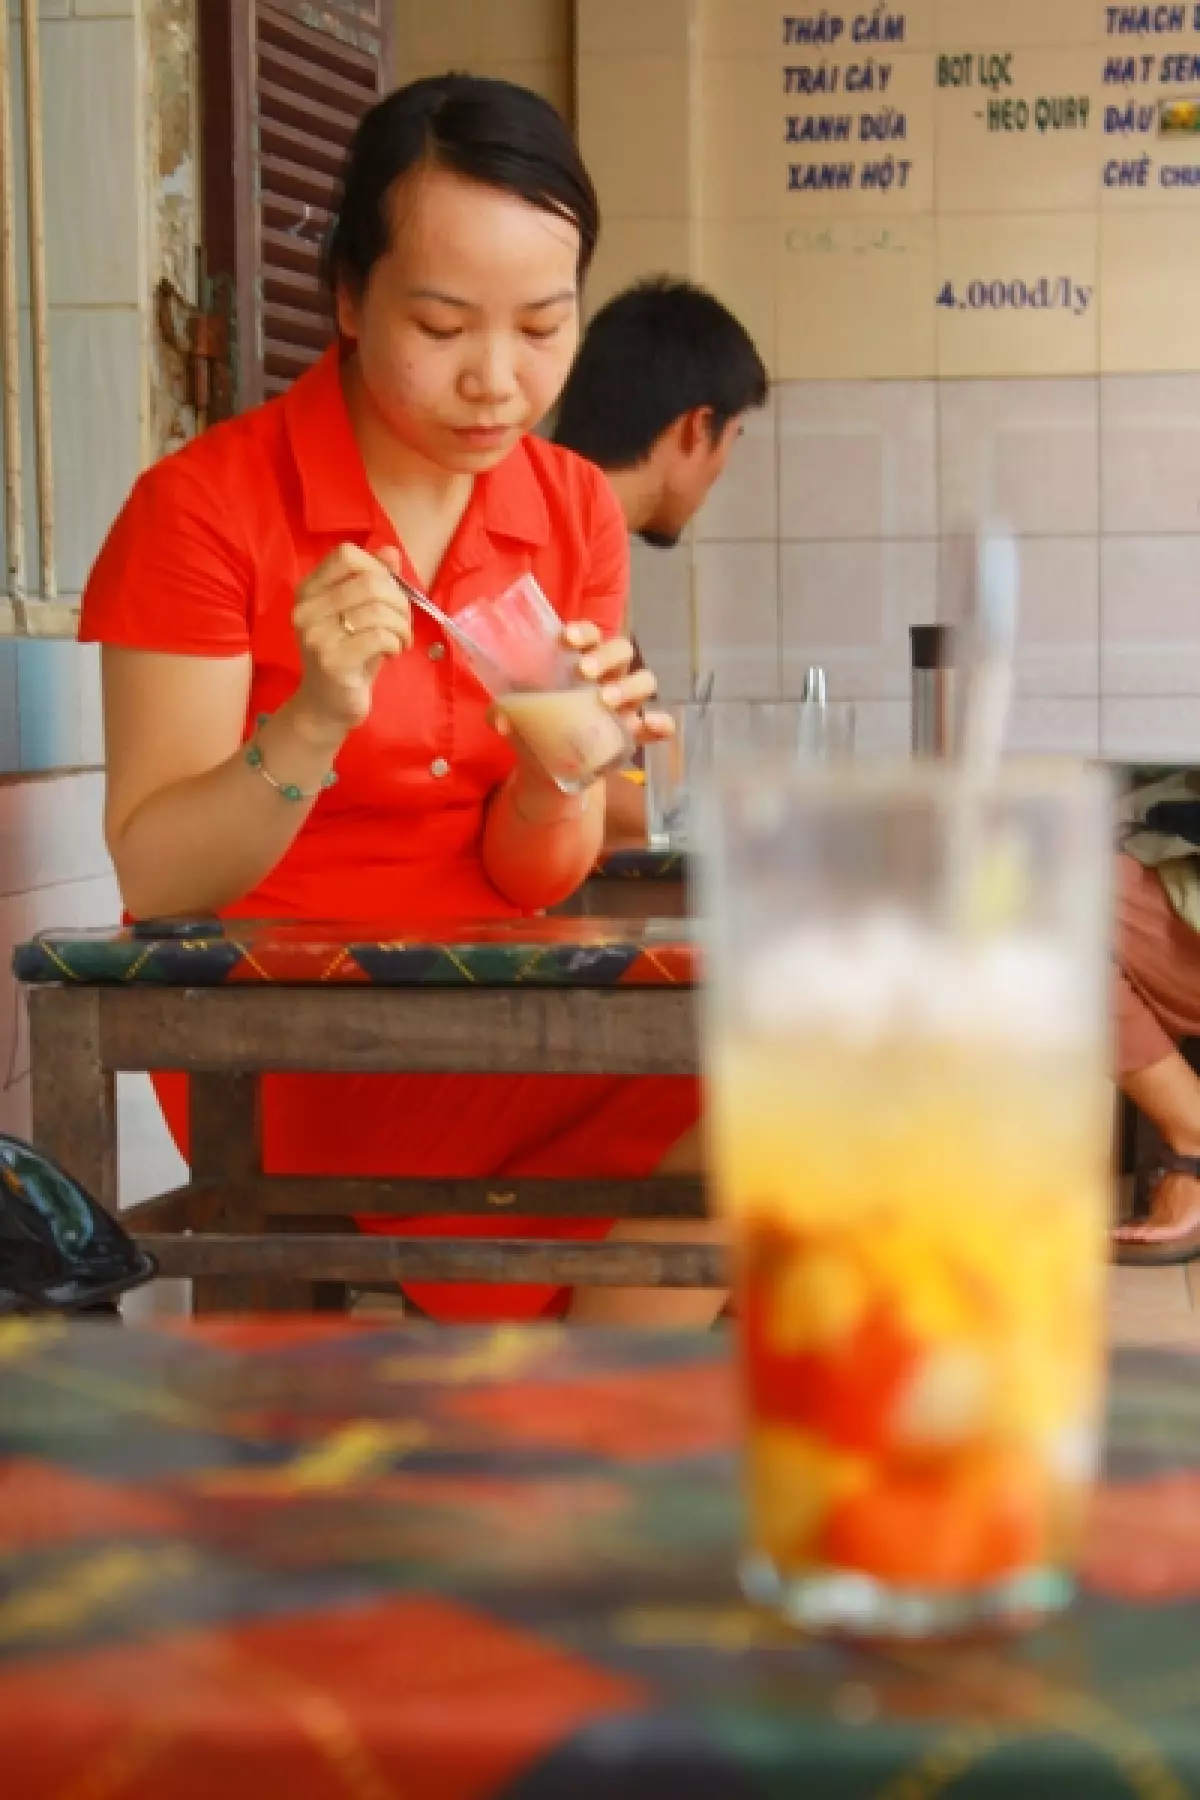 A glass of chè with ice can cool down a hot summer day in Huế.